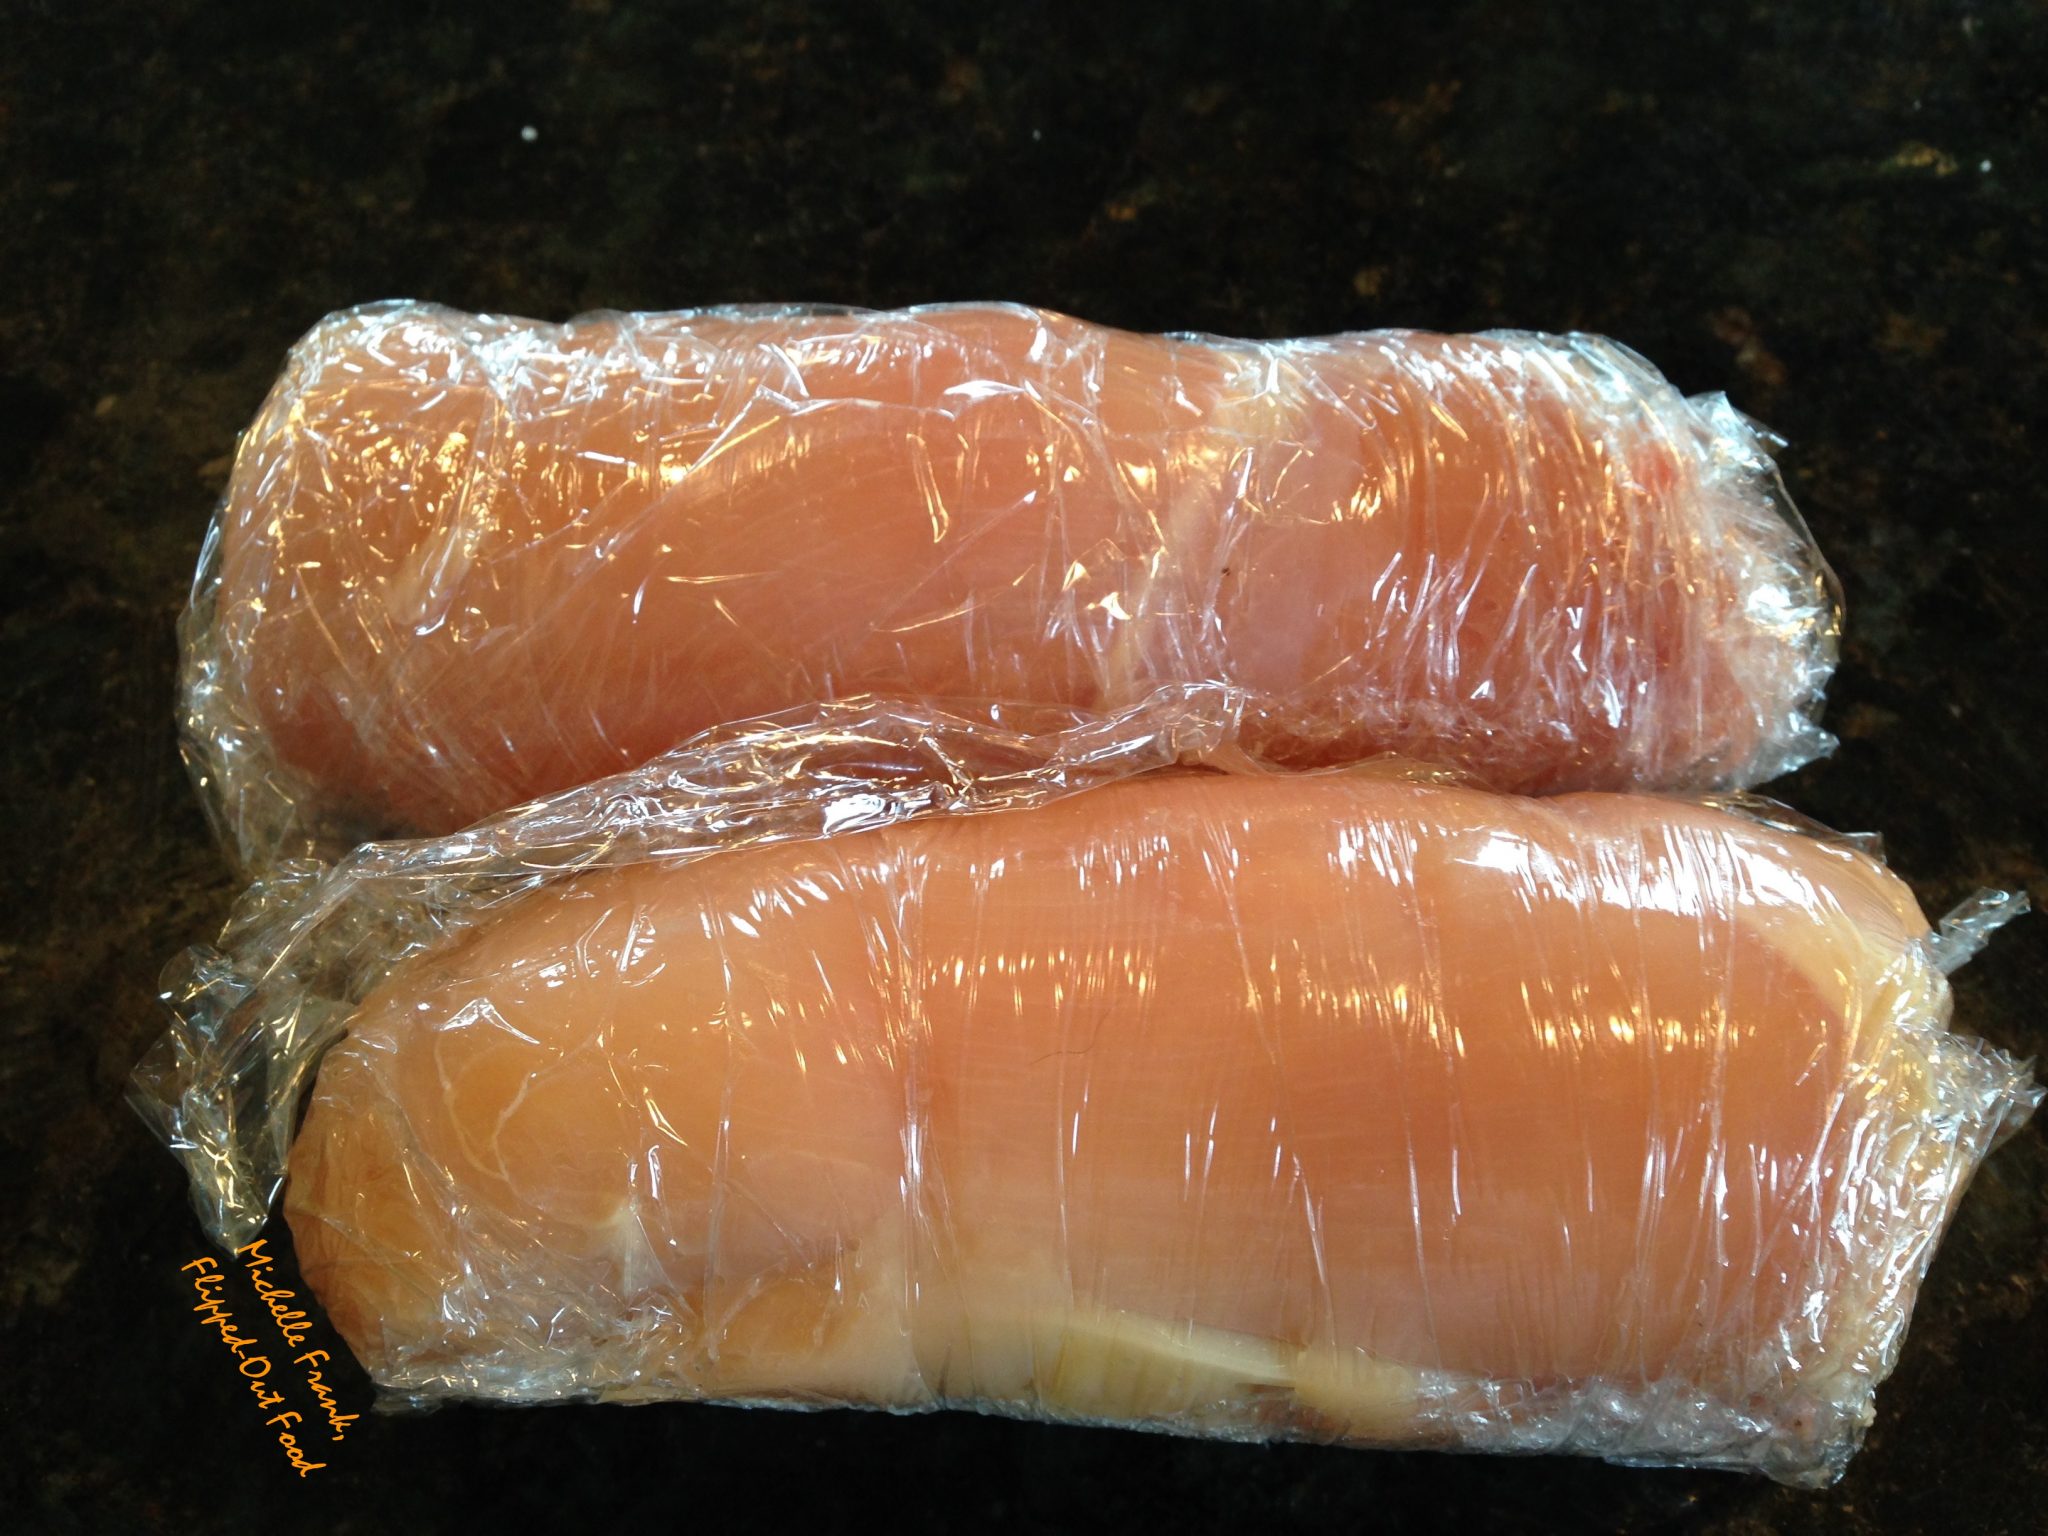 The rolled up work-ahead chicken rollatini wrapped in plastic, ready to go into the refrigerator.